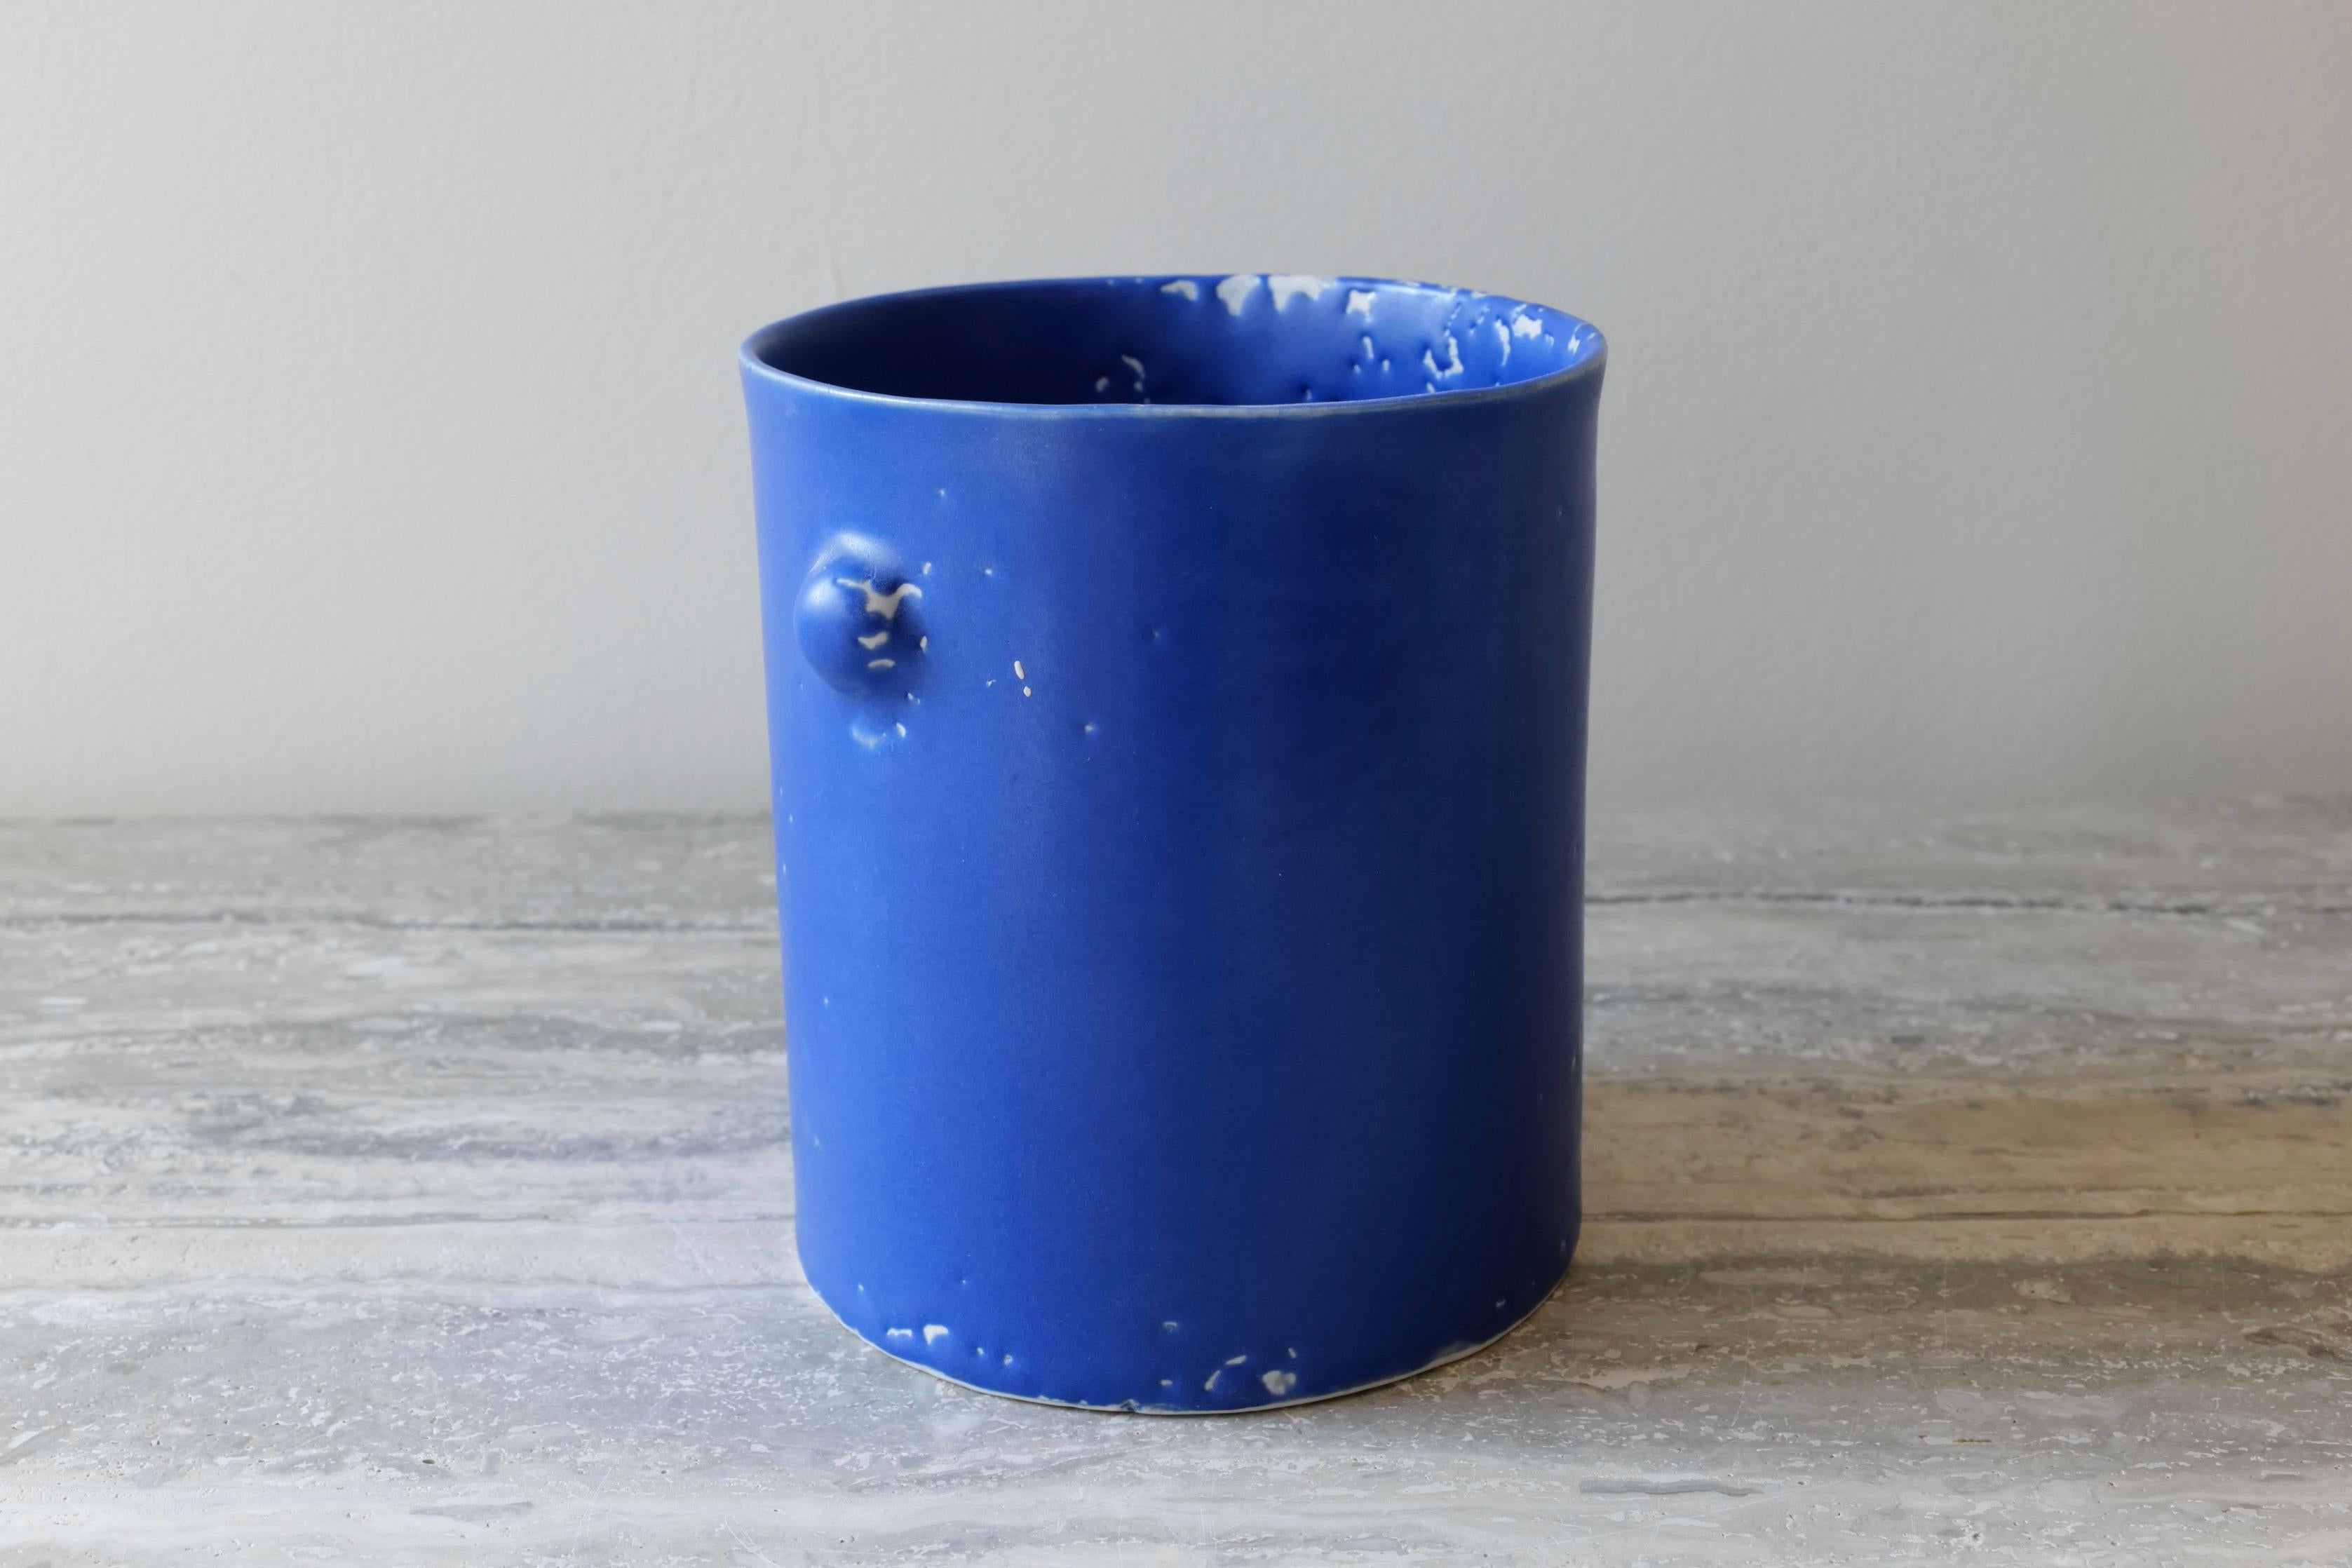 This vase is hand-cast in porcelain and glazed with a rich microcrystalline cobalt glaze that has a beautiful and loose crawl texture across the vessel. The ‘bumps’ motif recalls some classical embellishment with some loose evocation of the Baroque